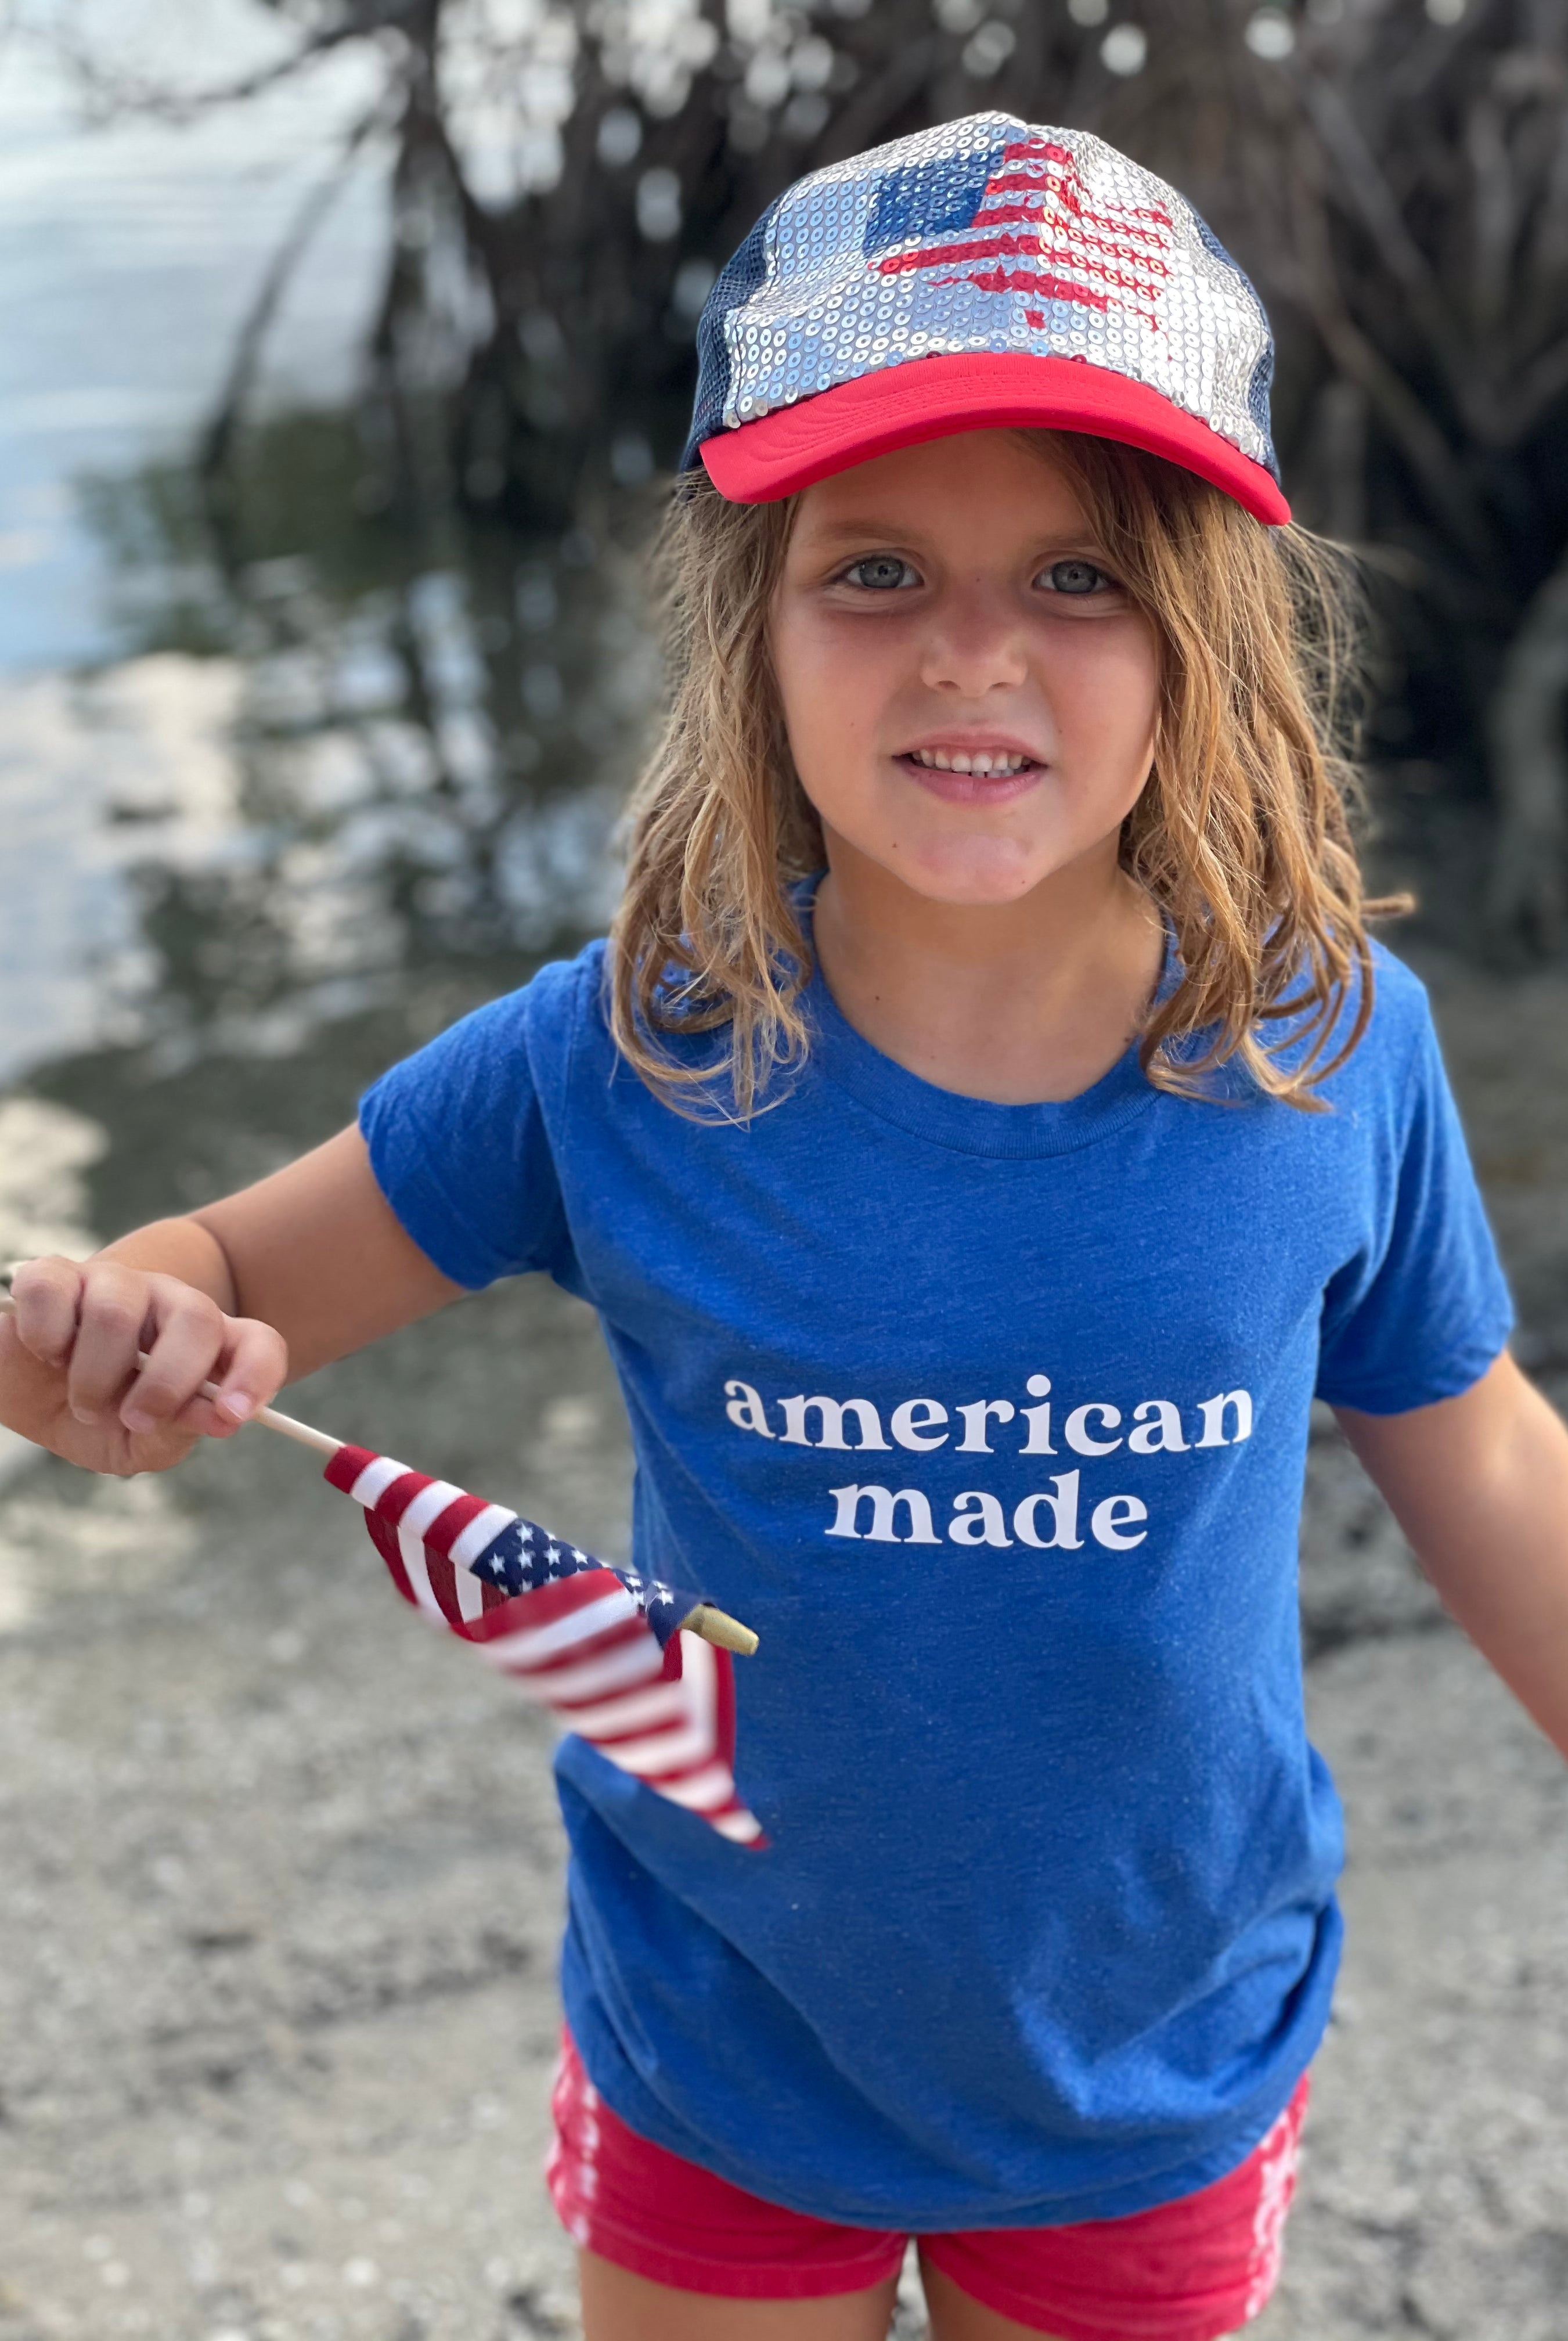 American Made. Bella and Canvas super soft t-shirt proudly made in the USA. Color shirt for this little American cutis is haether blue.